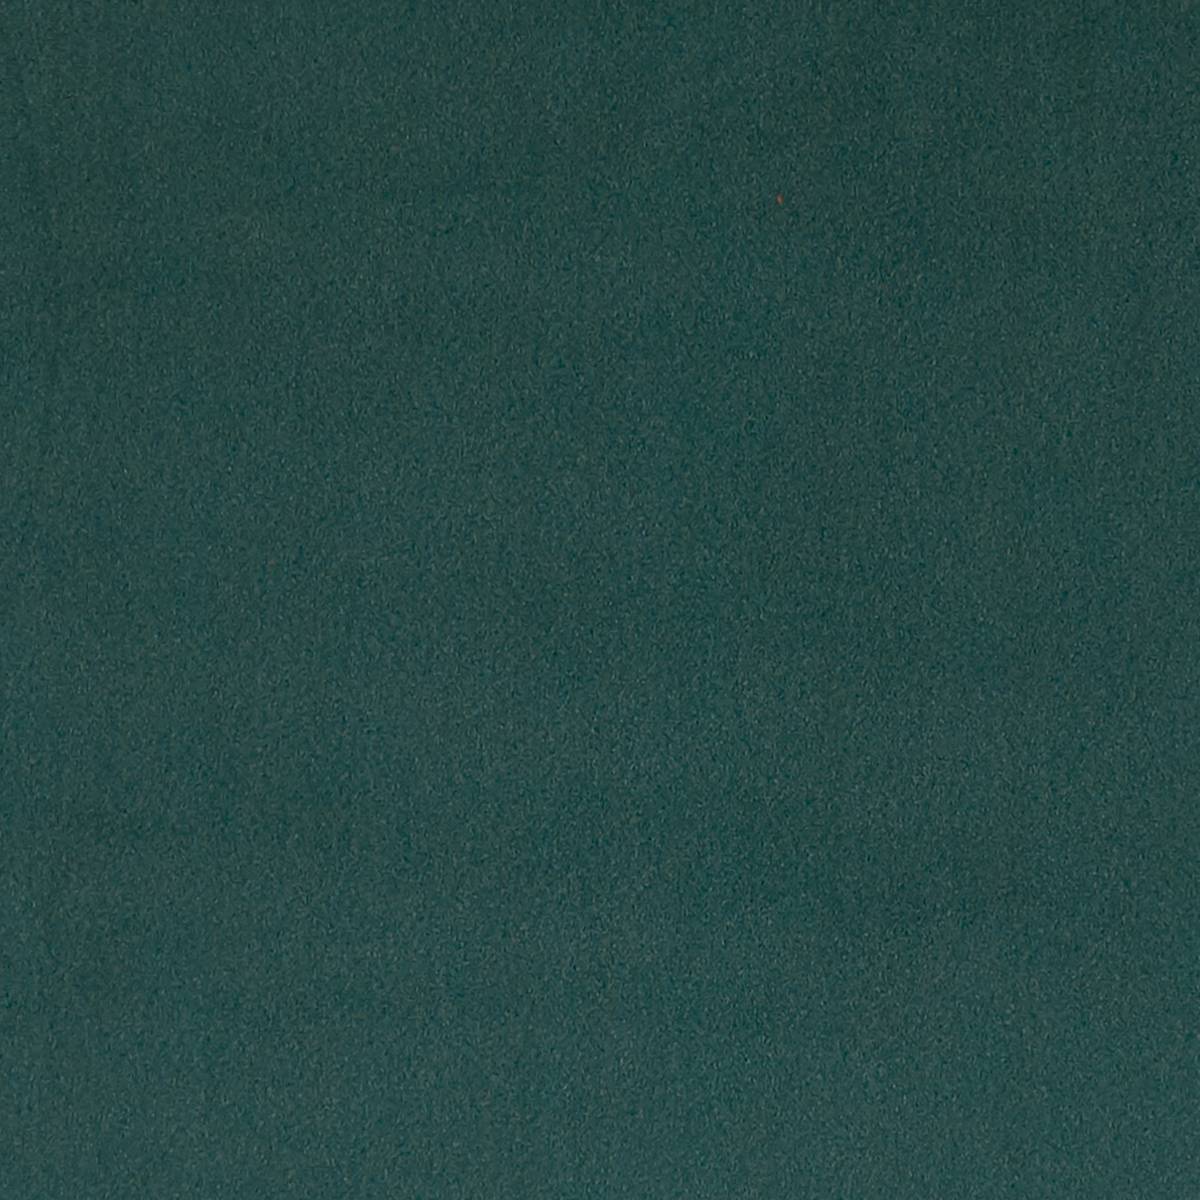 Lucca Teal Fabric by Studio G